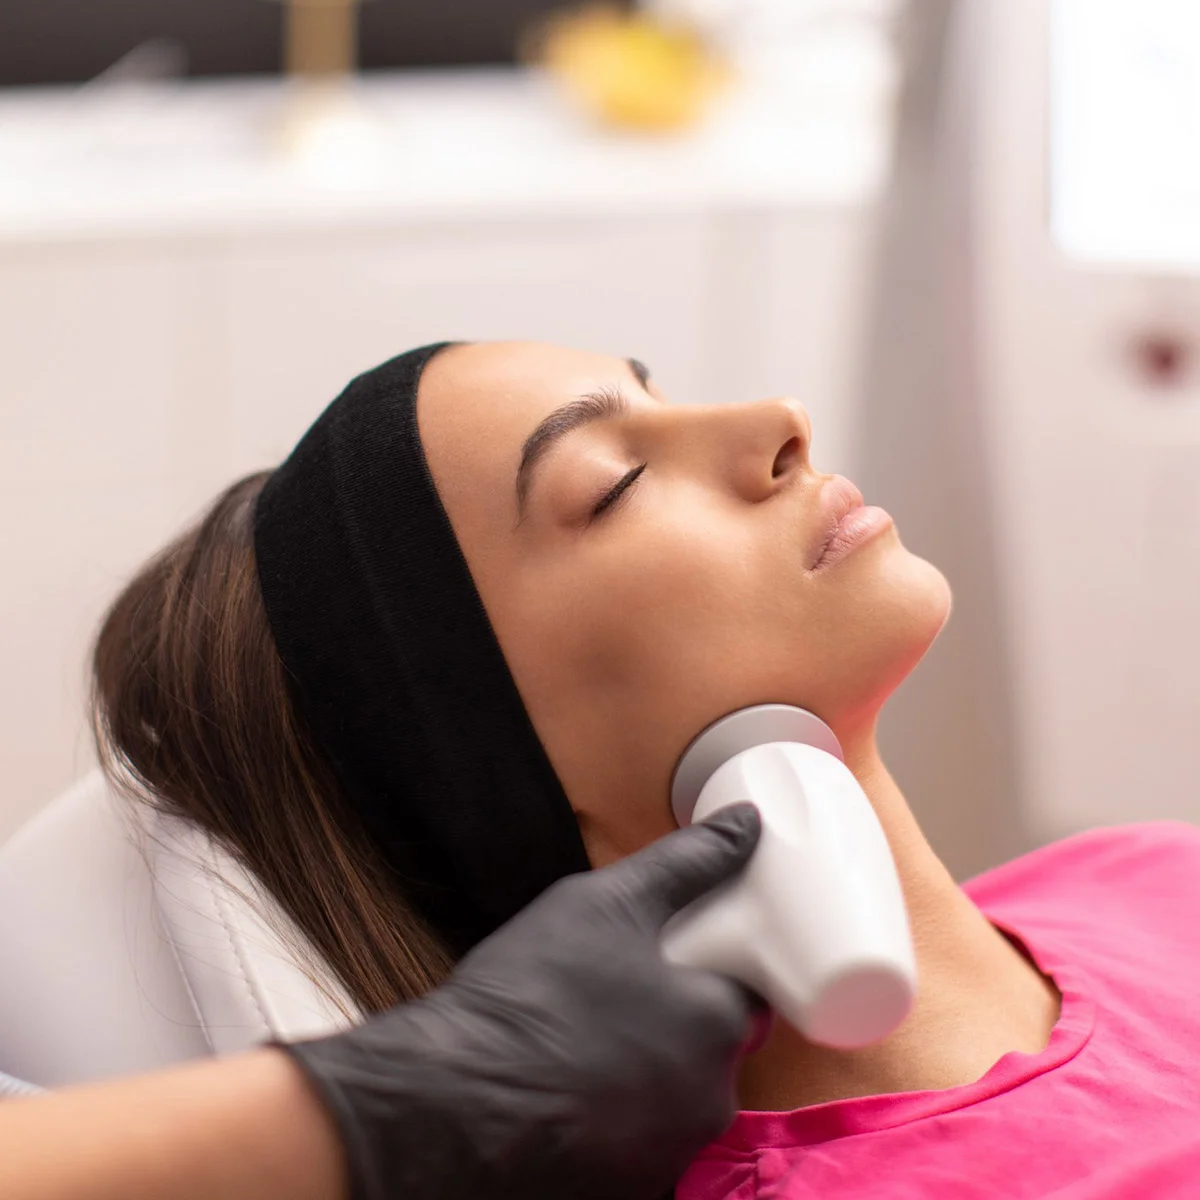 Woman receiving MOXI Laser Treatment to her cheek and neck